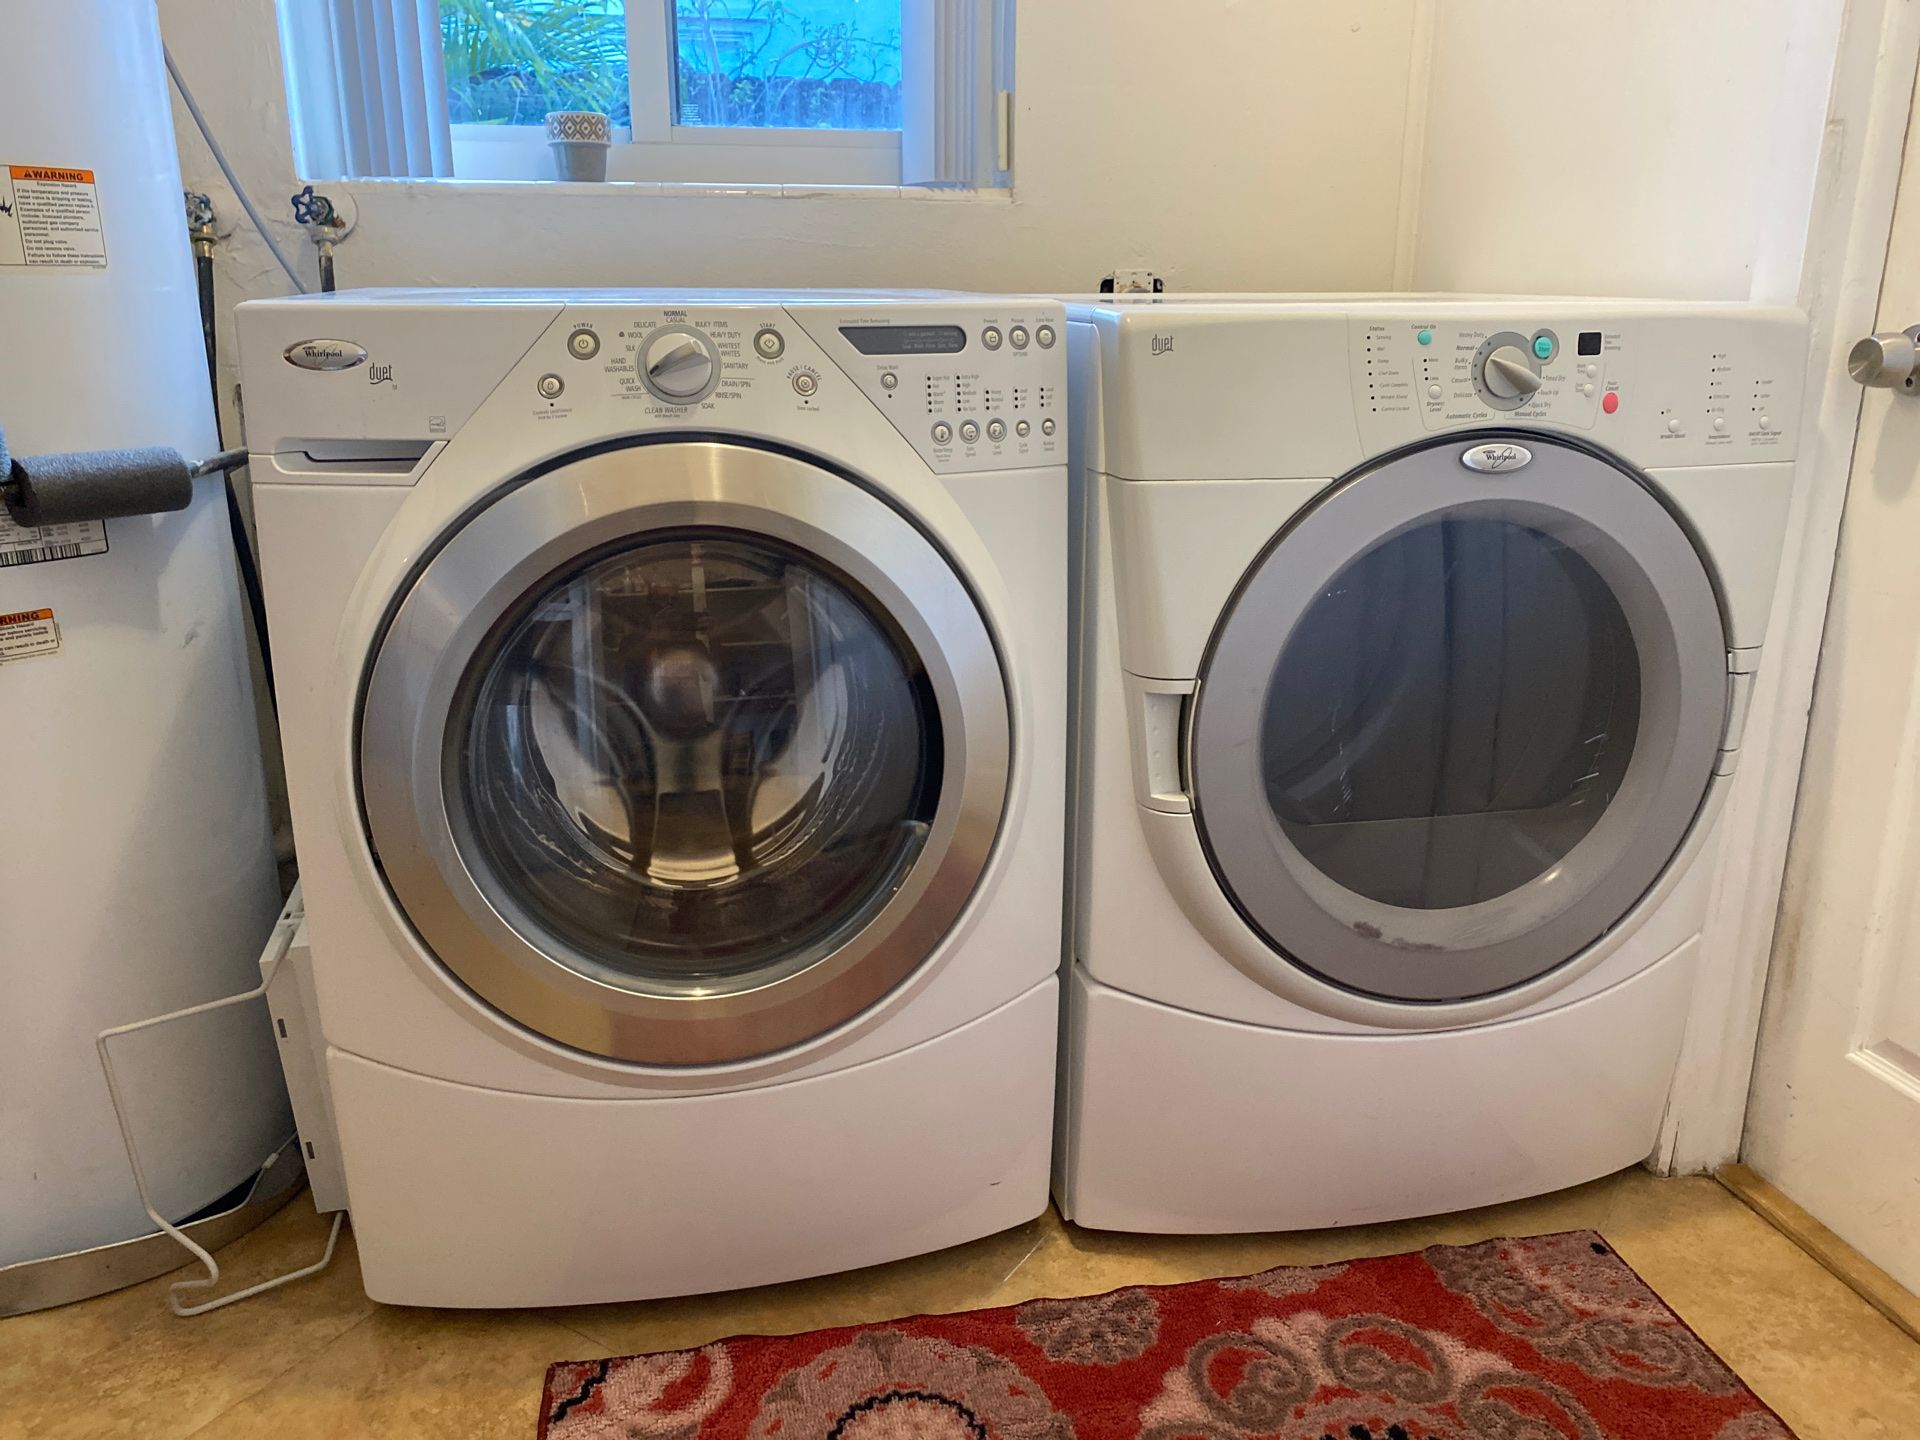 Whirlpool Duet washer and dryer set